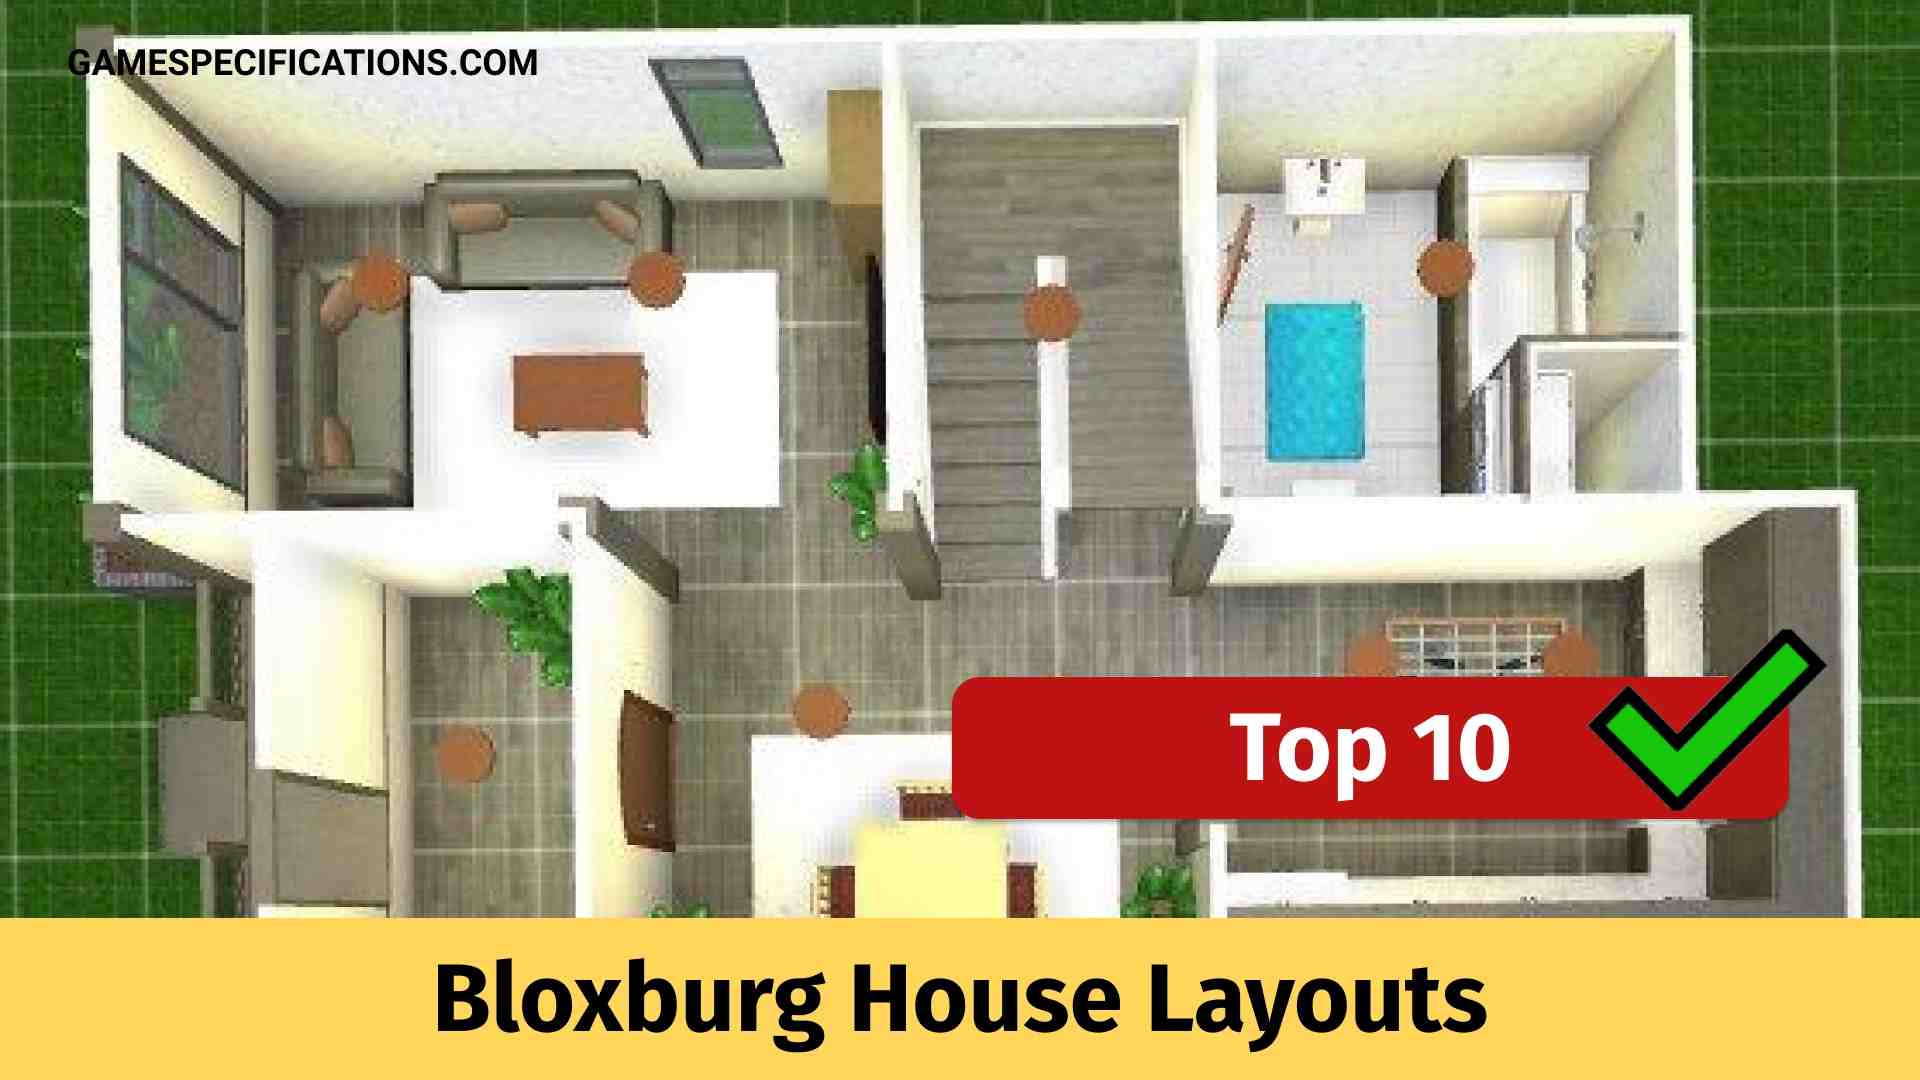 22 Bloxburg House Layouts To Build Awesome Homes - Game Specifications